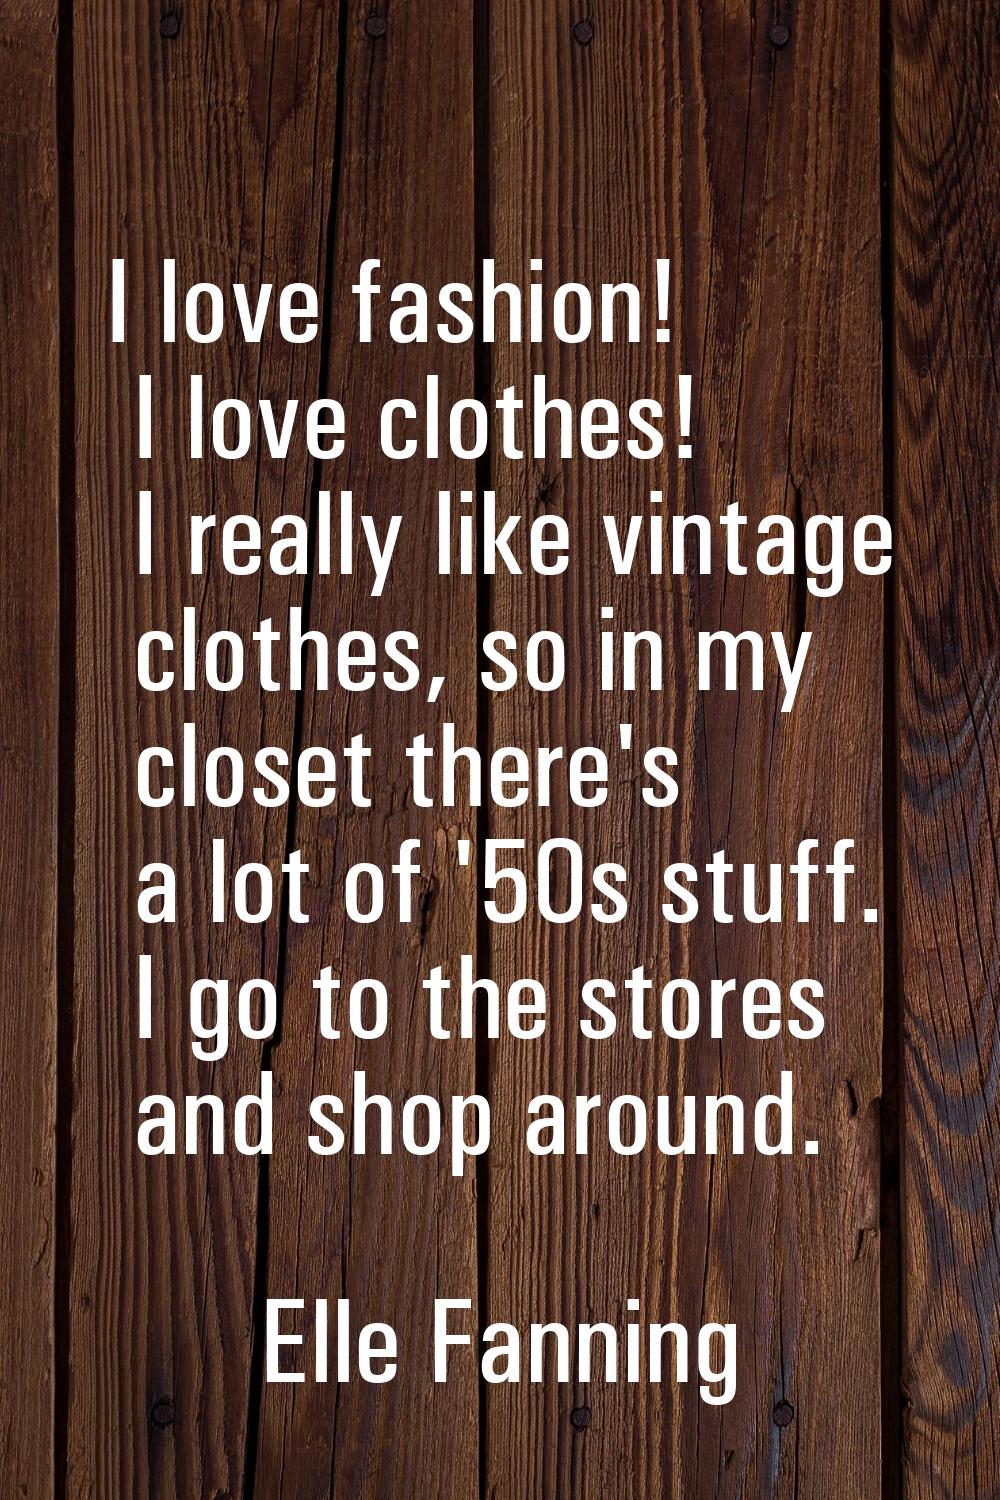 I love fashion! I love clothes! I really like vintage clothes, so in my closet there's a lot of '50